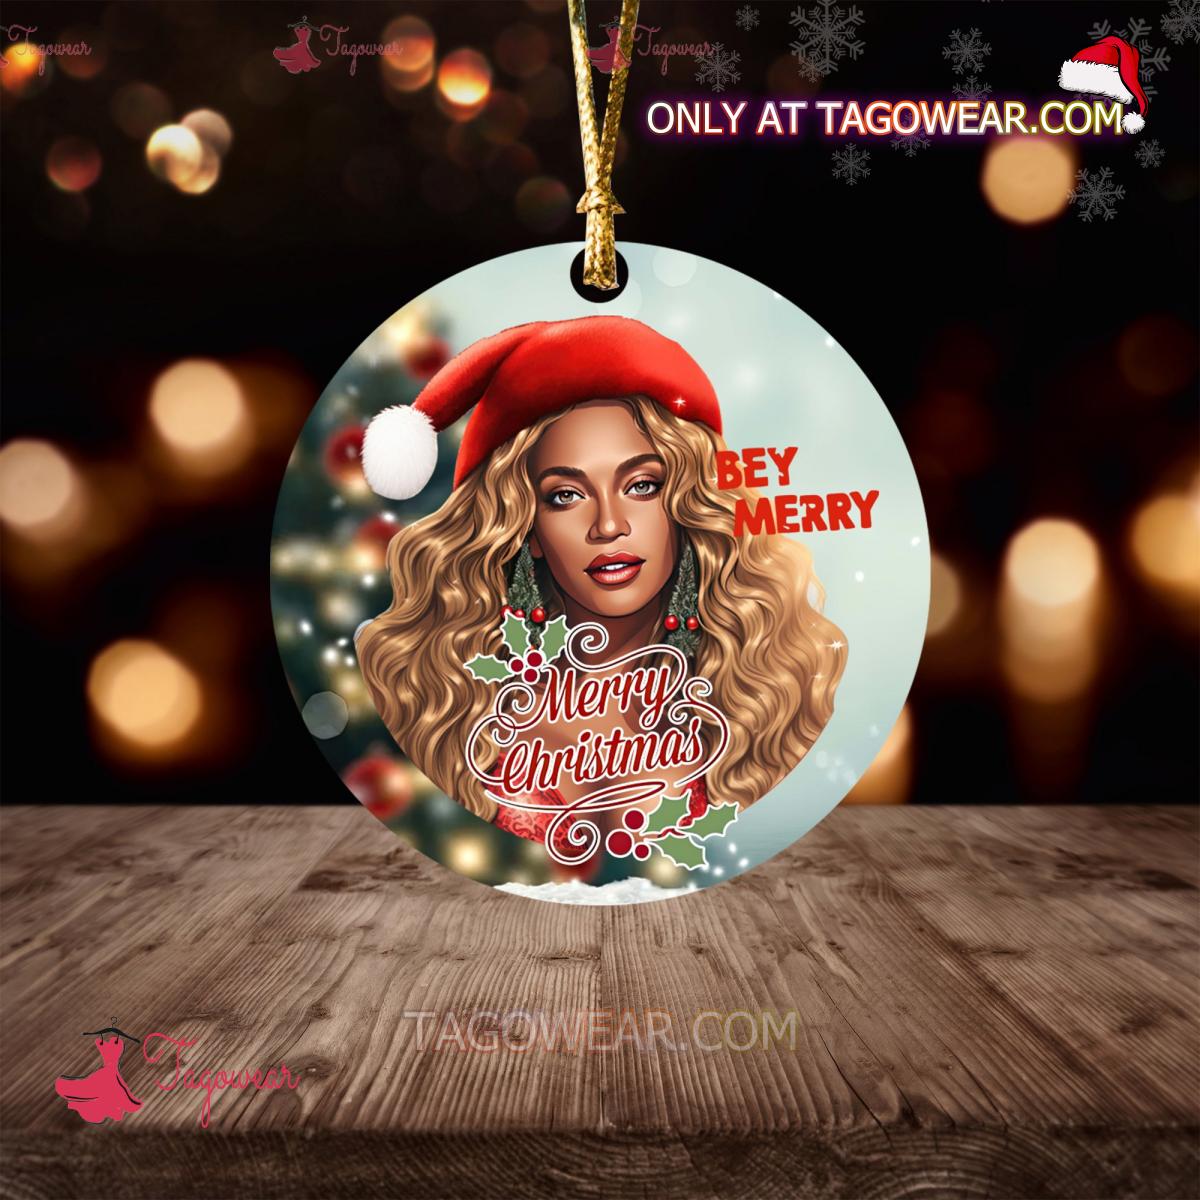 Beyonce Merry Christmas Bey Merry Ornament